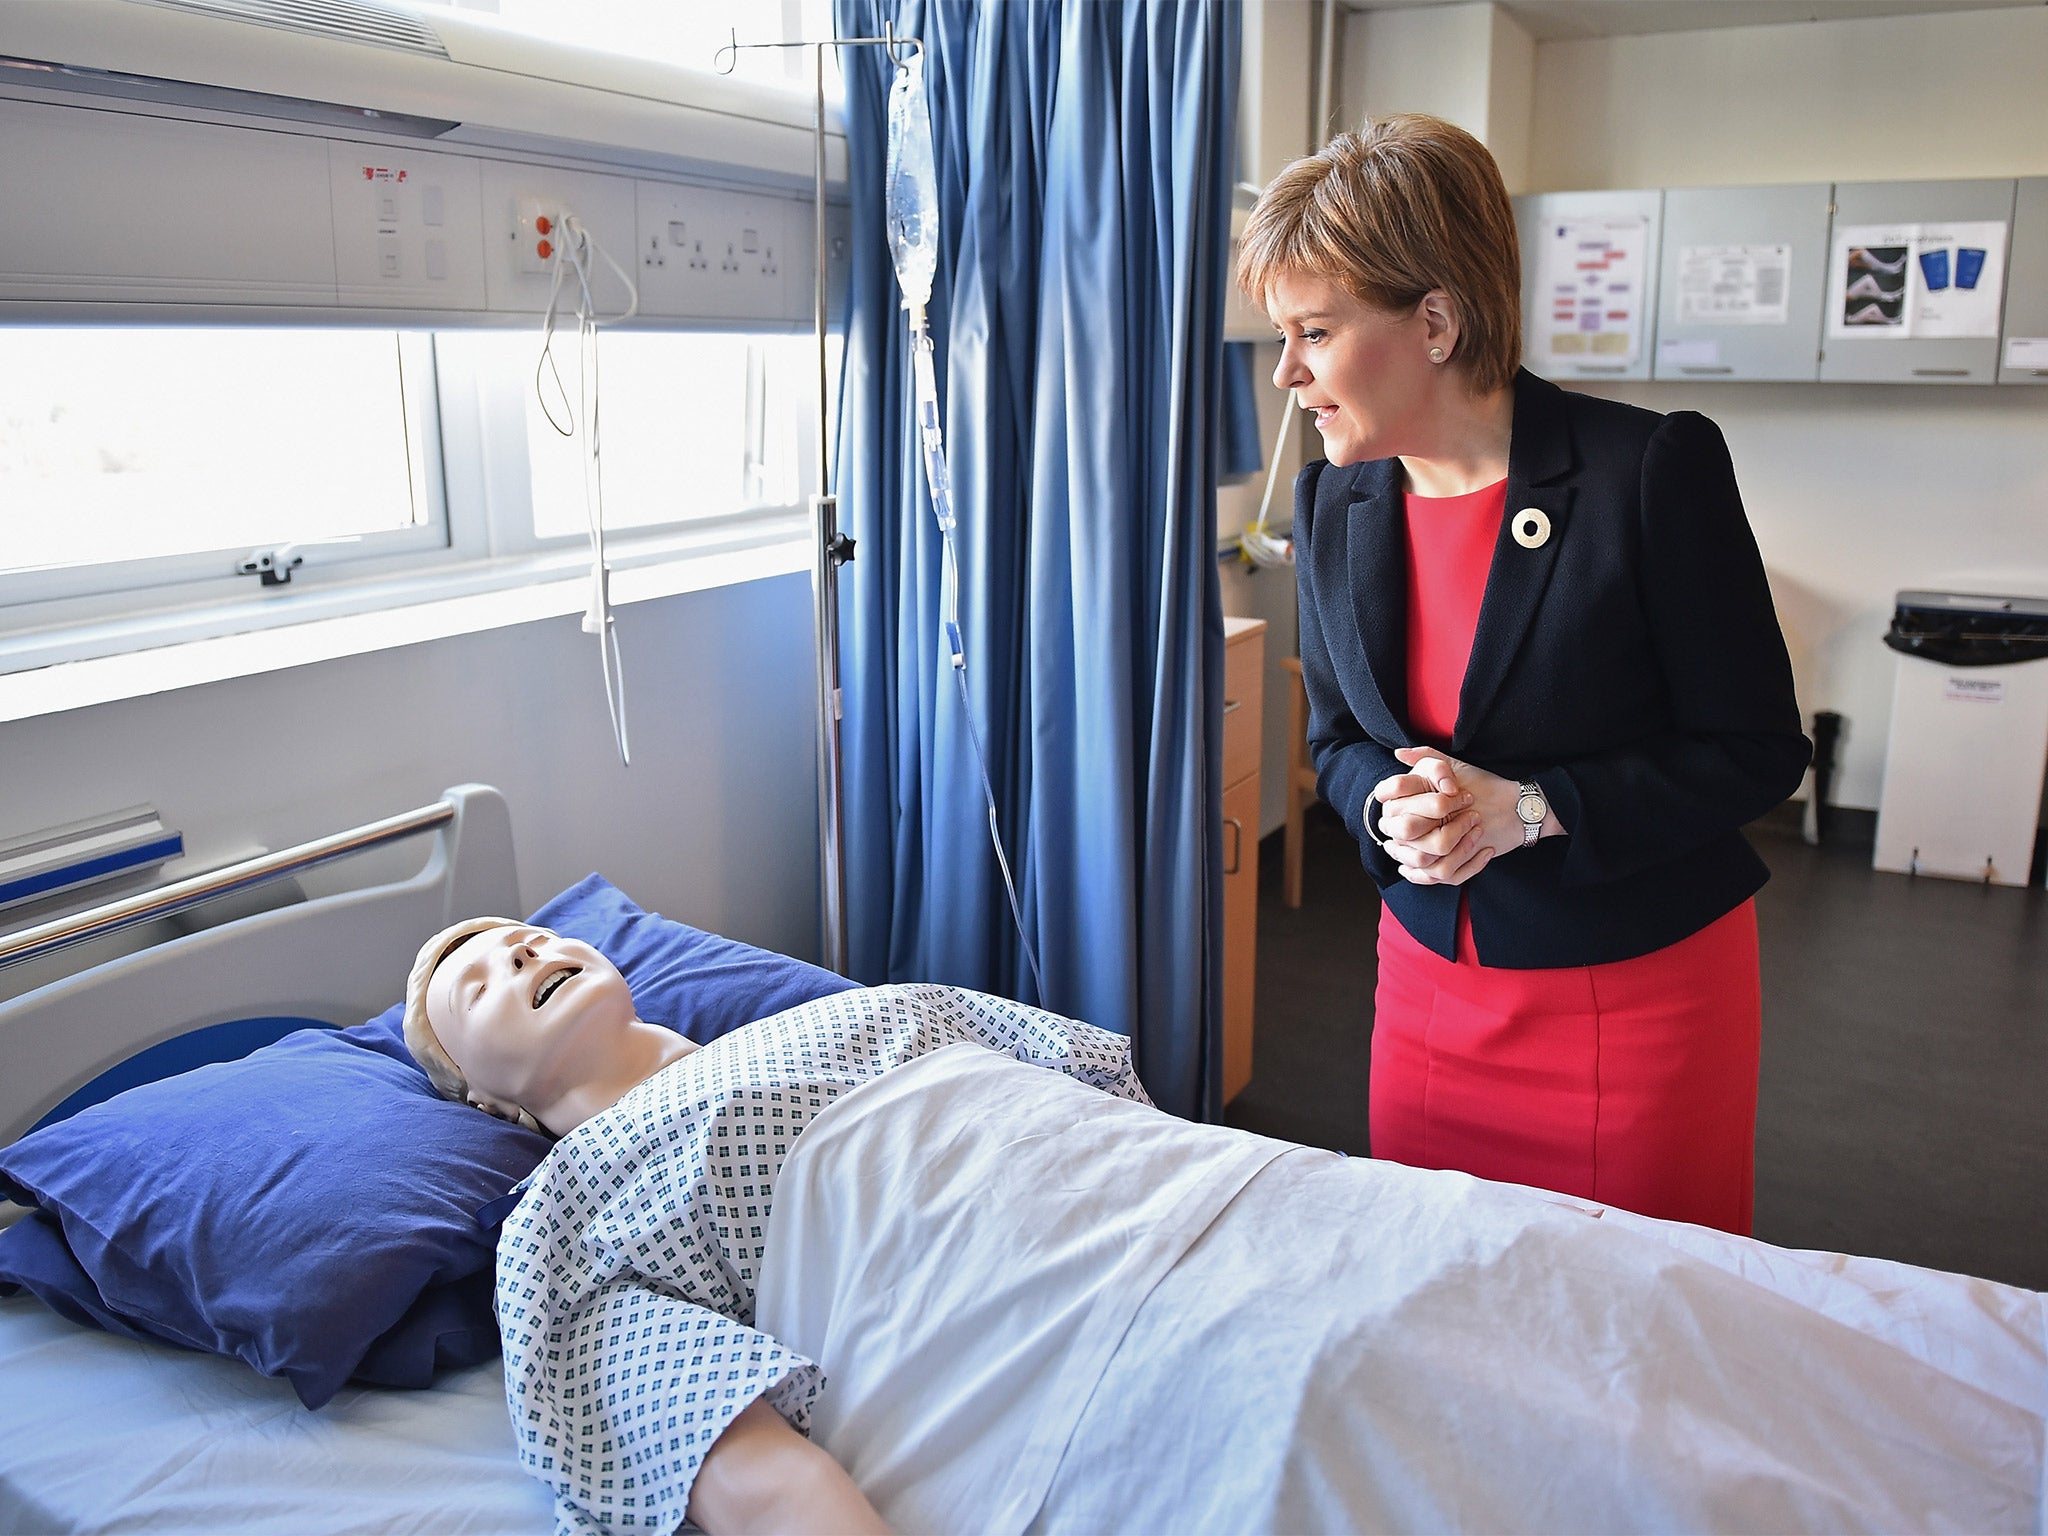 First Minister Nicola Sturgeon visits a mock hospital ward at Queen Margaret University in Mussleburgh